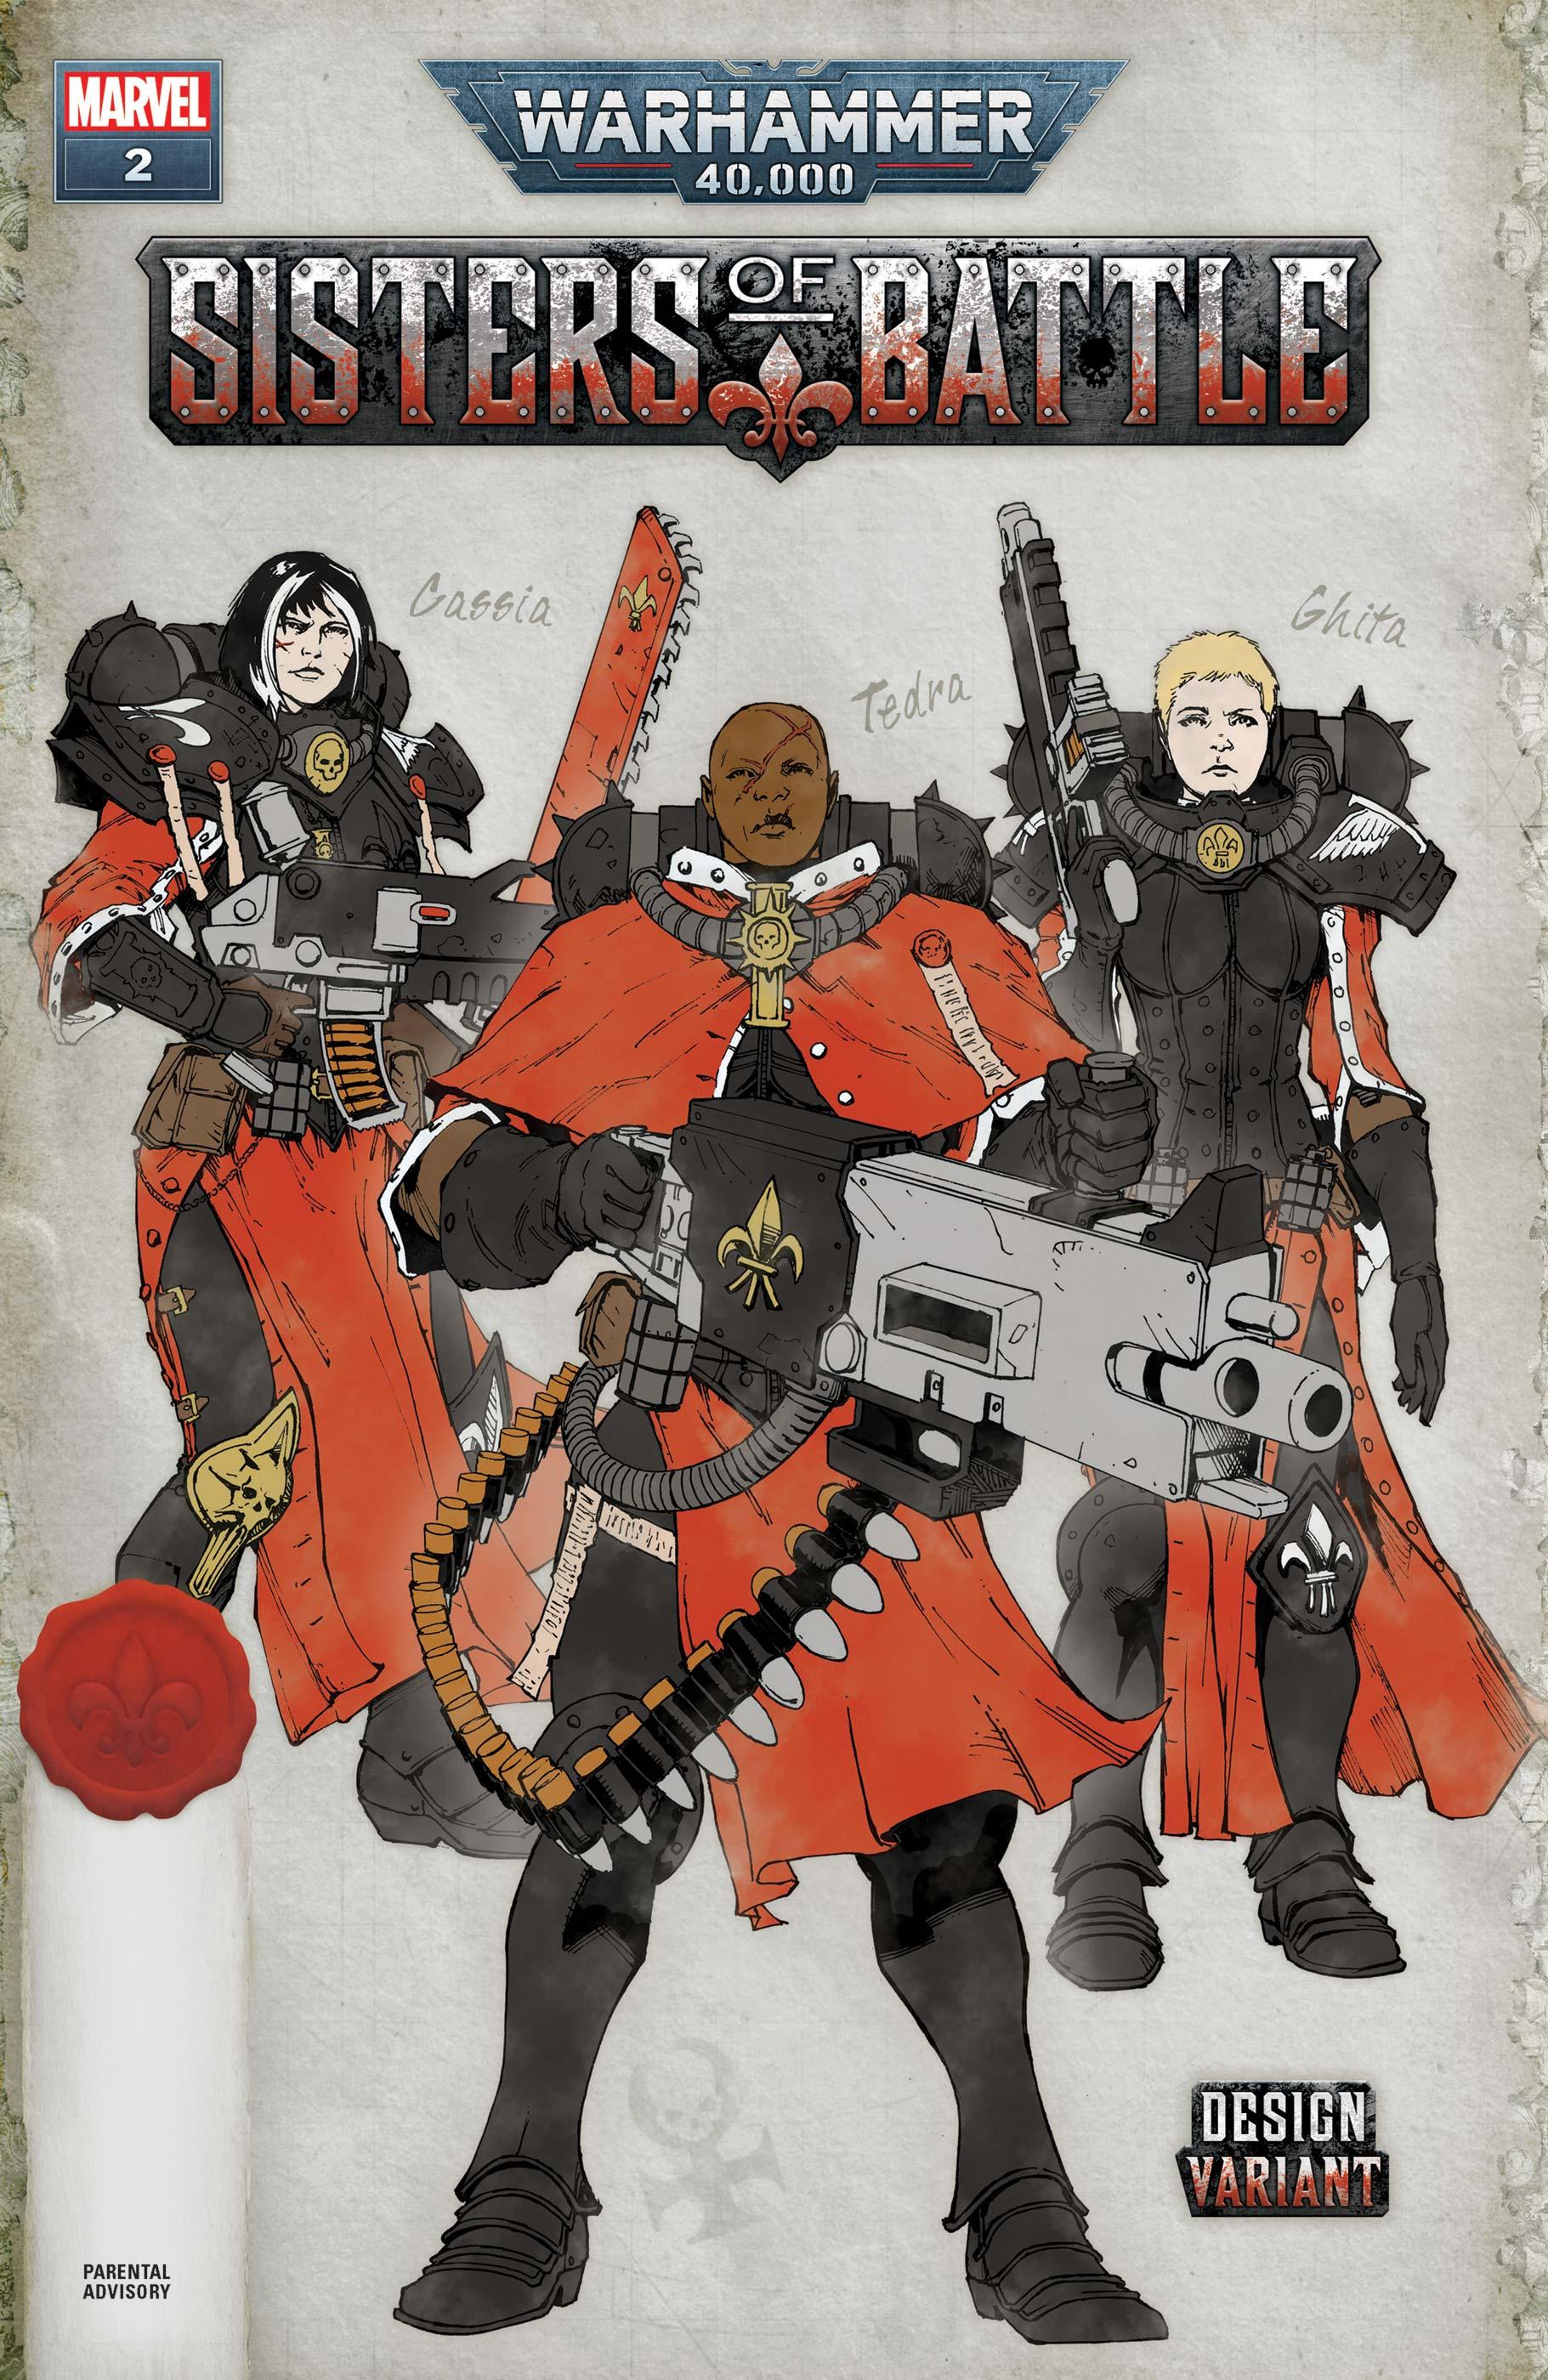 Warhammer 40,000: Sisters of Battle Comic Issue 2 (Variant Edition Alternative)